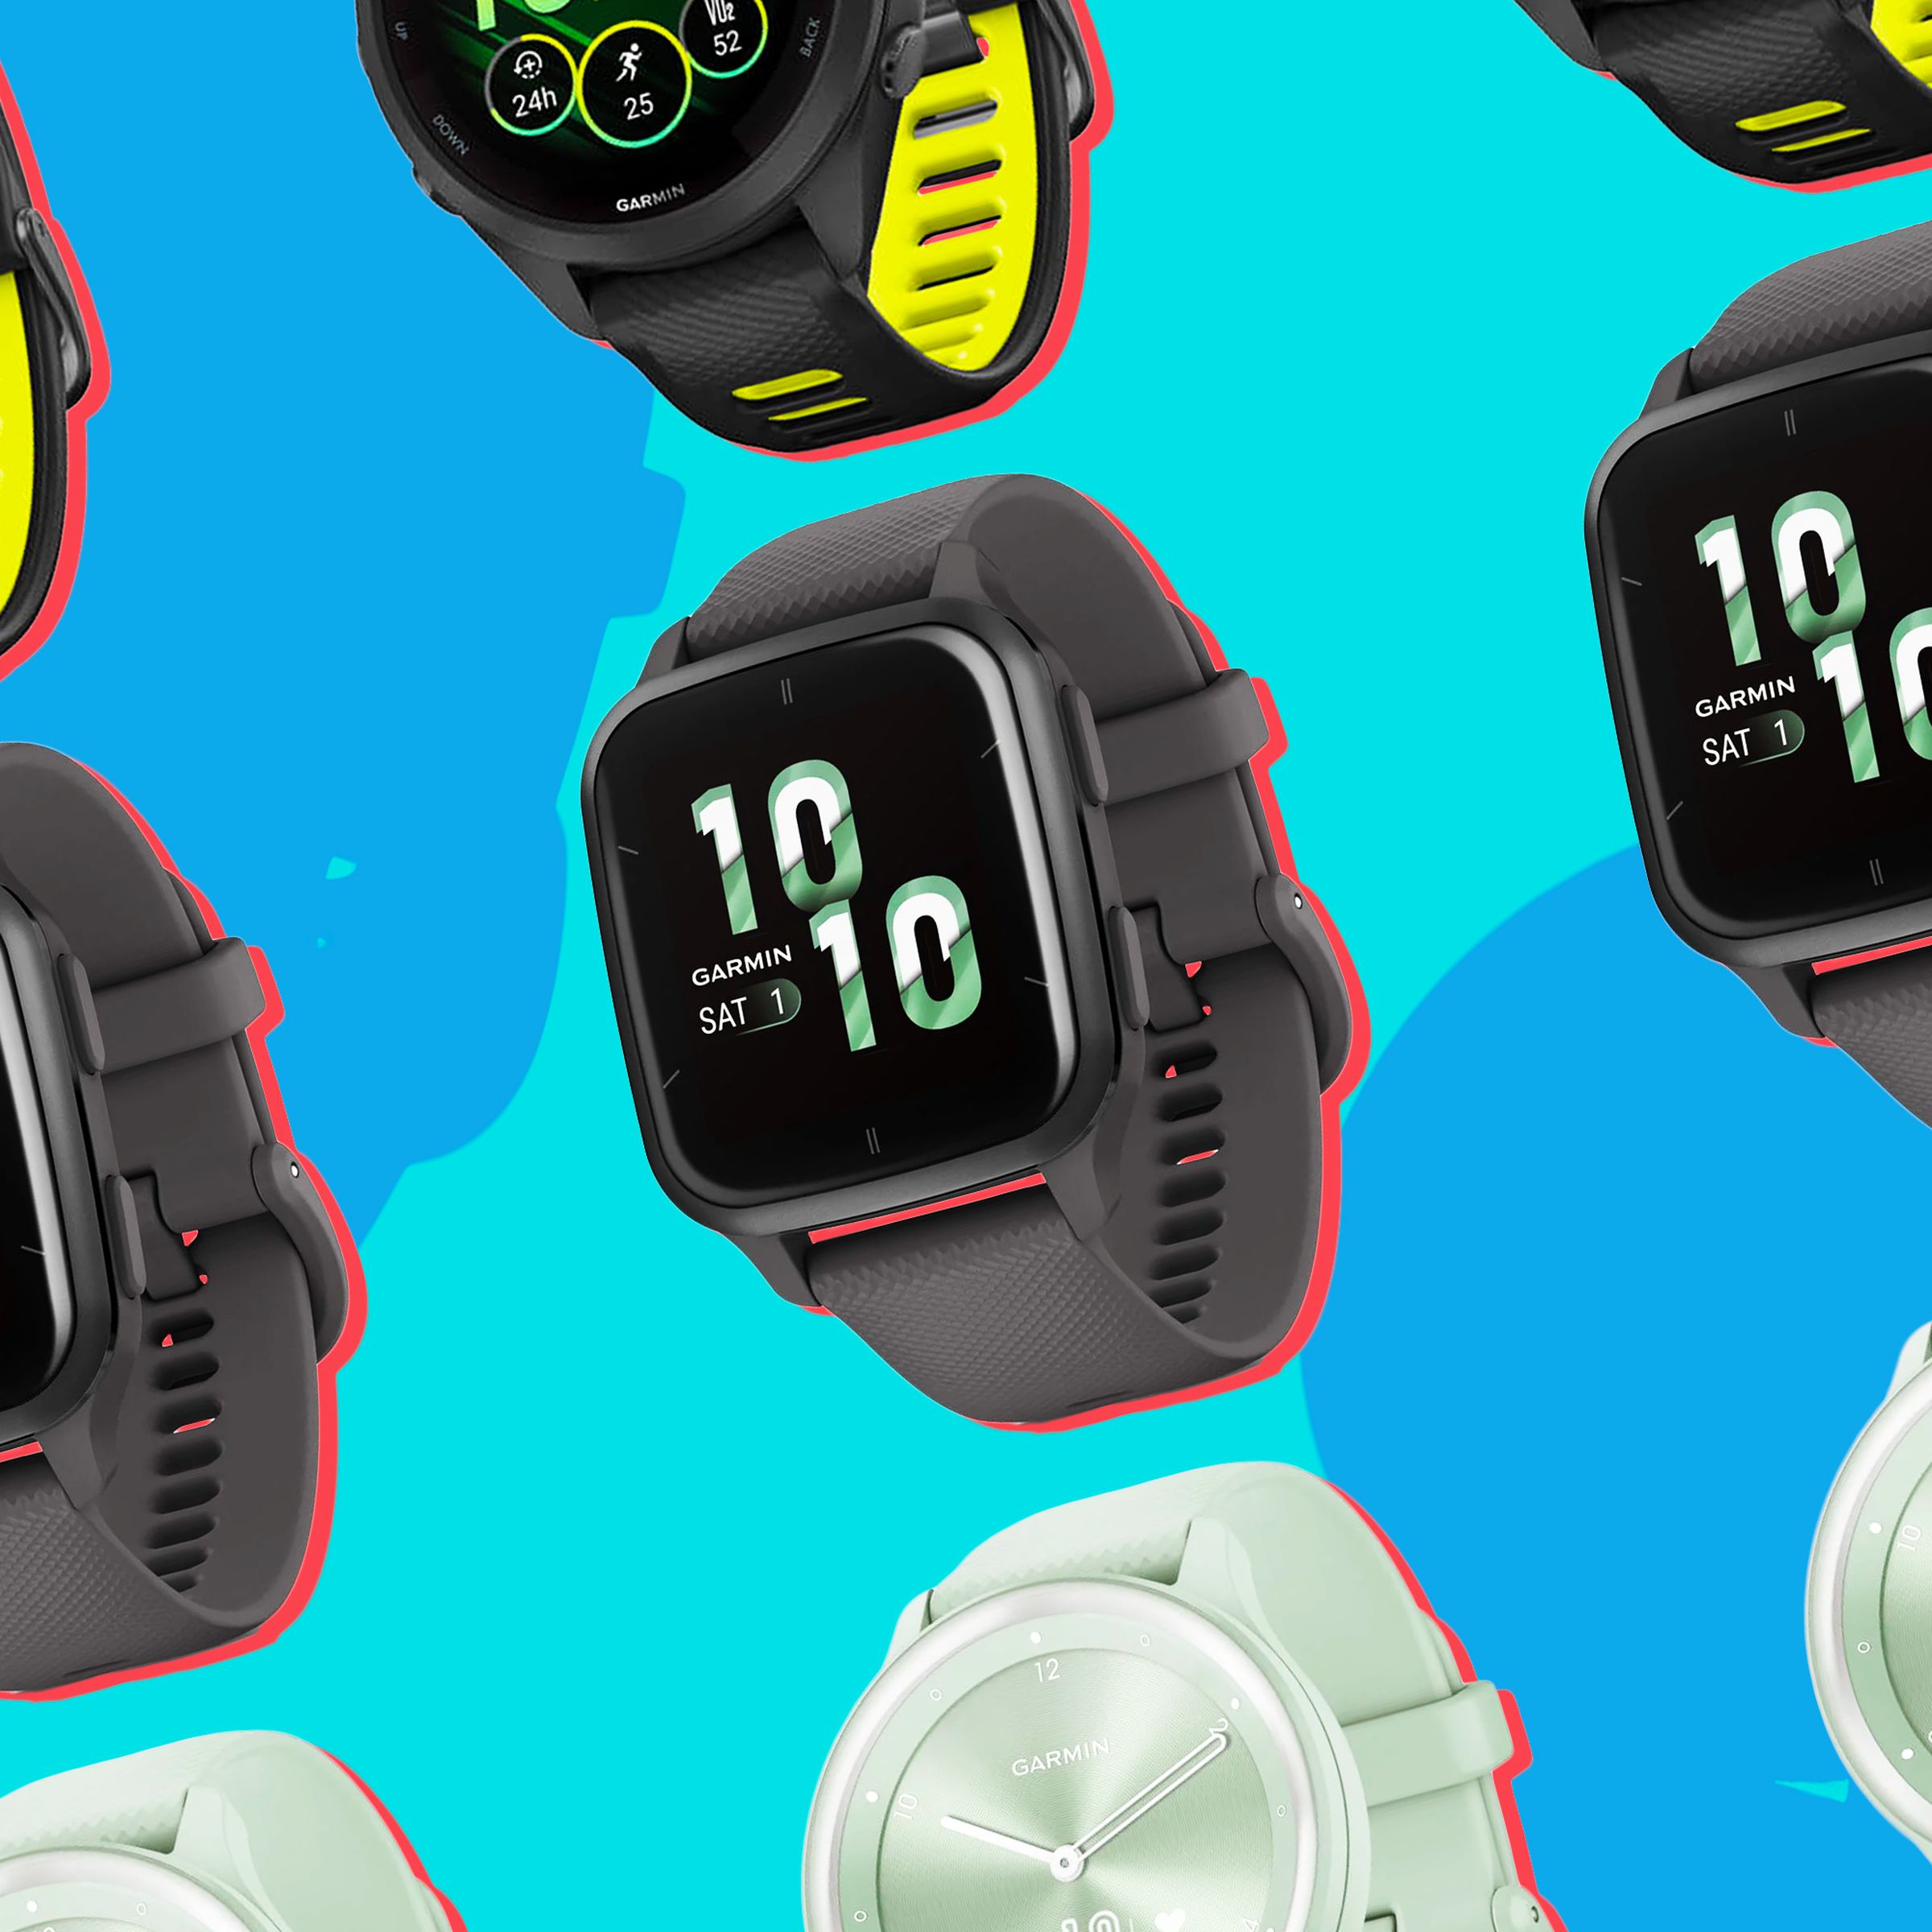 Several Garmin watches on a colorful background